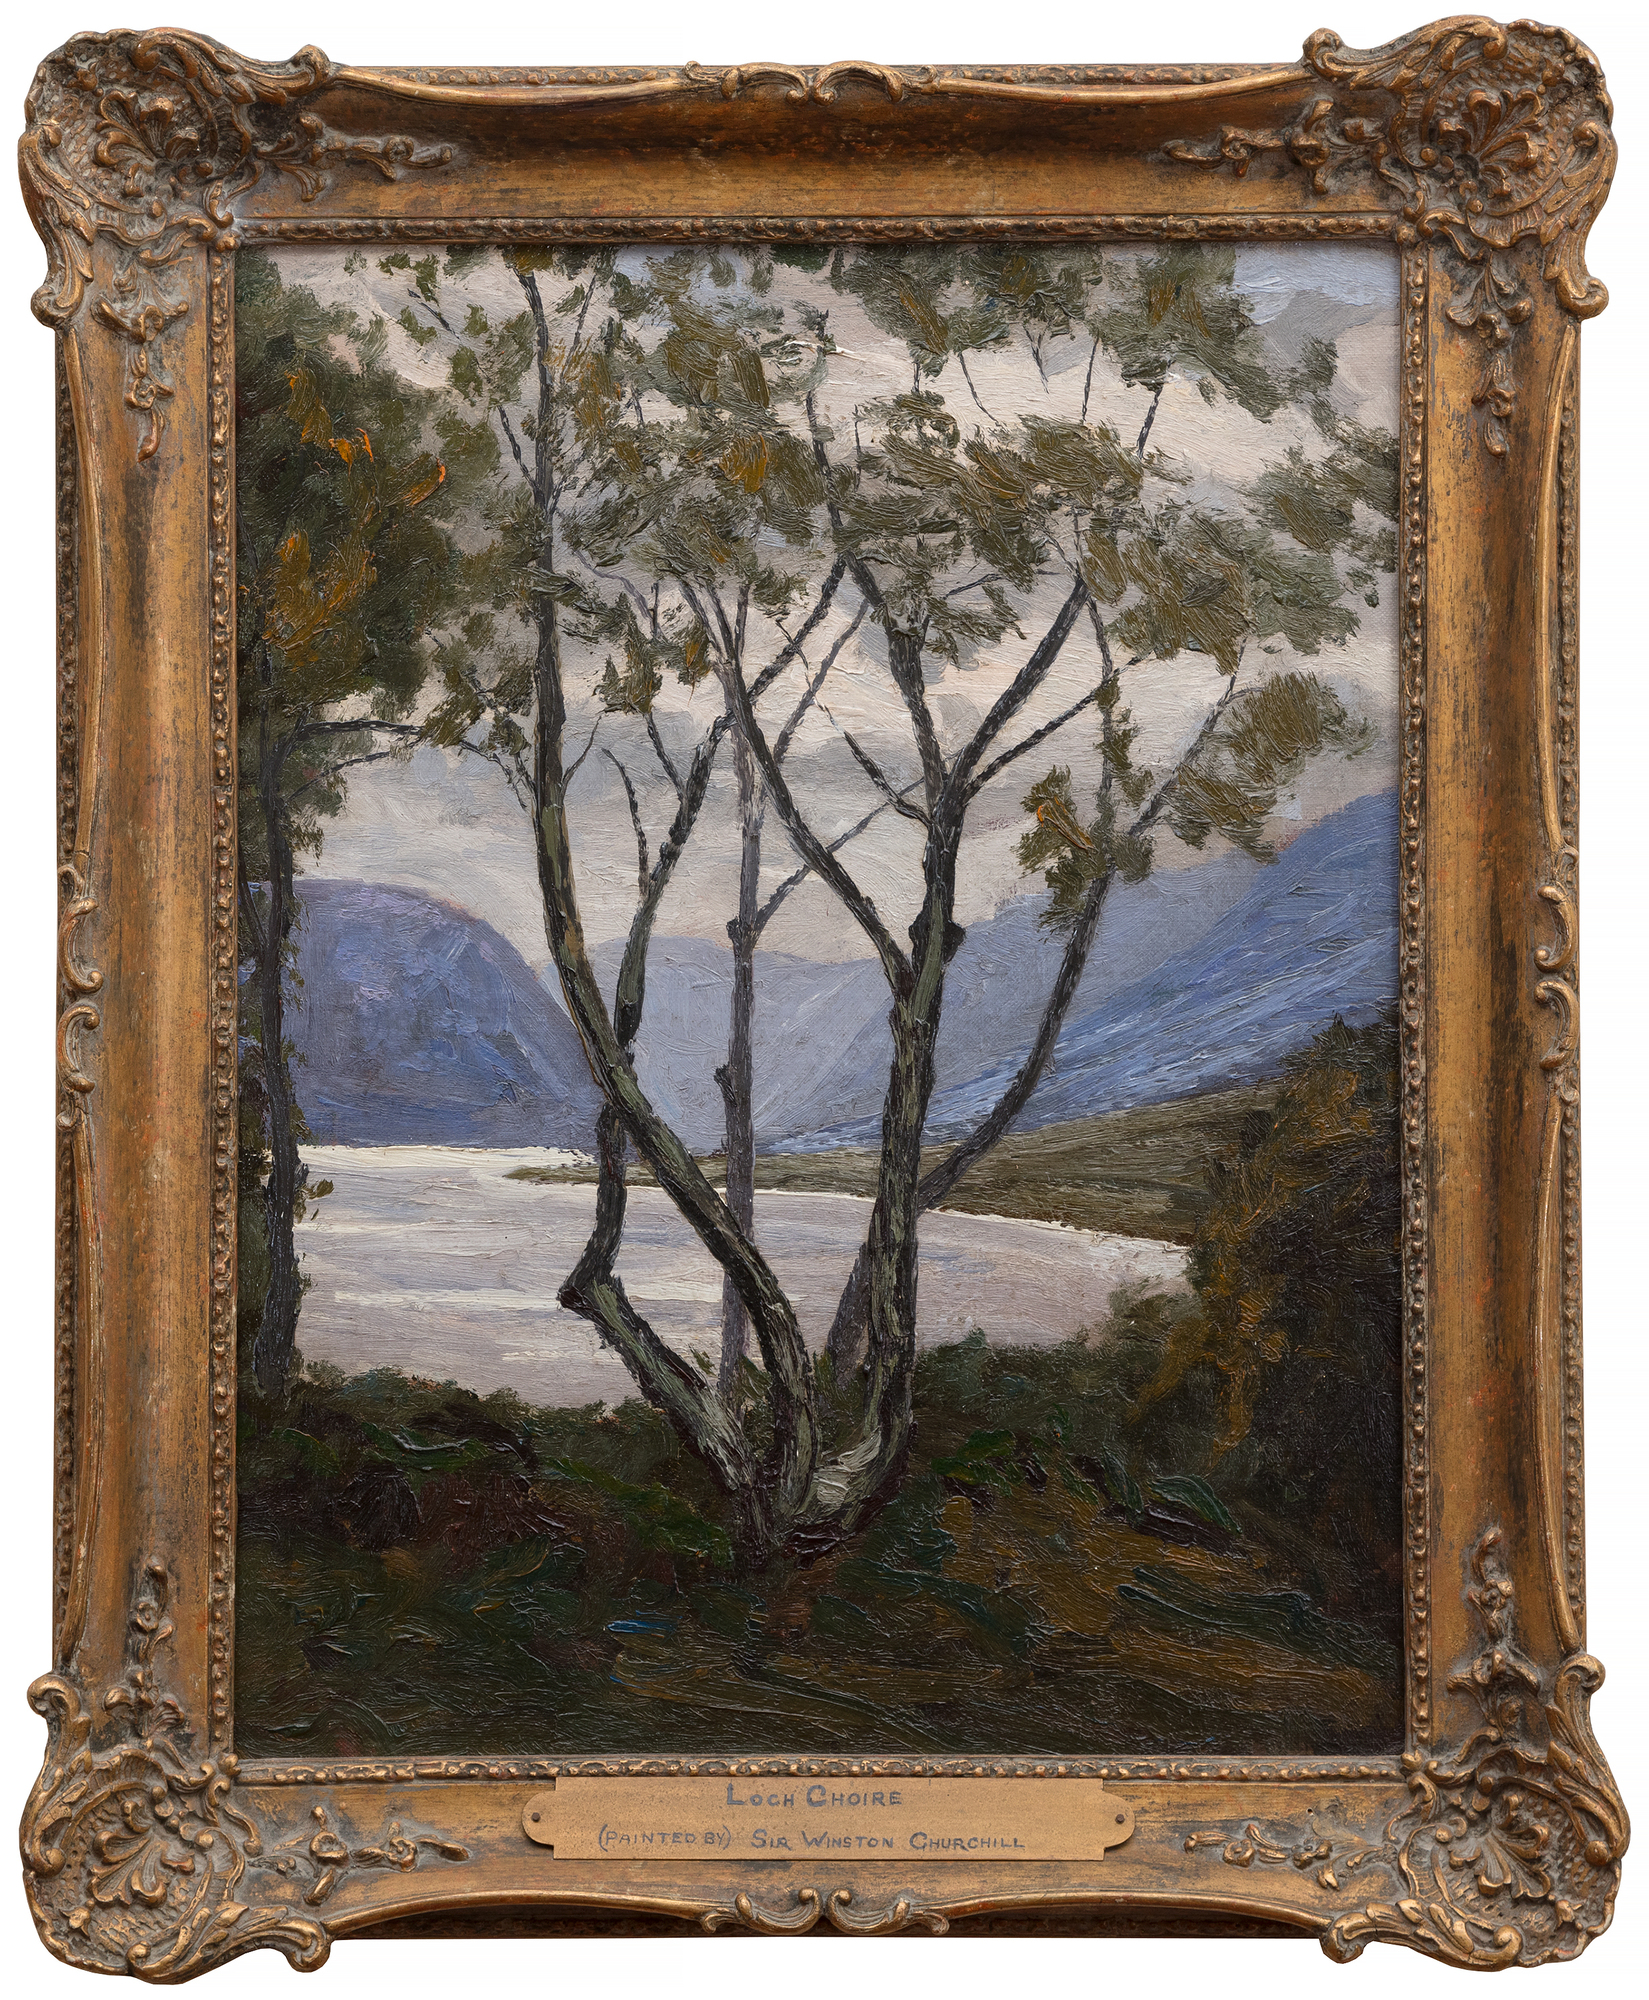 Painted while staying at Dunrobin Castle, the estate of the Duke of Sutherland, Churchill chose to set his easel behind a tree where he likely thought of it as a framing device, adding a layer of depth, creating a stronger sense of foreground, middle ground, and background, enhancing the three-dimensionality of the picture. Churchill painted at both Dunrobin as well as the Duke’s Sutton Place estate, later the home of John Paul Getty.&lt;br&gt;&lt;br&gt;As Mary Soames describes it in her book, Winston Churchill, His Life as a Painter, “1921 had been a year of heavy personal tidings” for Churchill and his family, as he lost both his mother, Jennie Cornwallis-West, and his beloved child, Marigold, aged nearly four.  In a letter to his wife Clementine, Churchill wrote, “… Many tender thoughts, my darling one of you and yr sweet kittens.  Alas I keep on feeling the hurt of the Duckadilly [Marigold’s pet name].”  That Churchill chose to stay with the Duke and Duchess at Dunrobin just after Marigold’s death speaks to their close friendship and his fondness for the area, including Loch Choire. It is no surprise that Churchill gifted the painting to the Duke of Sutherland